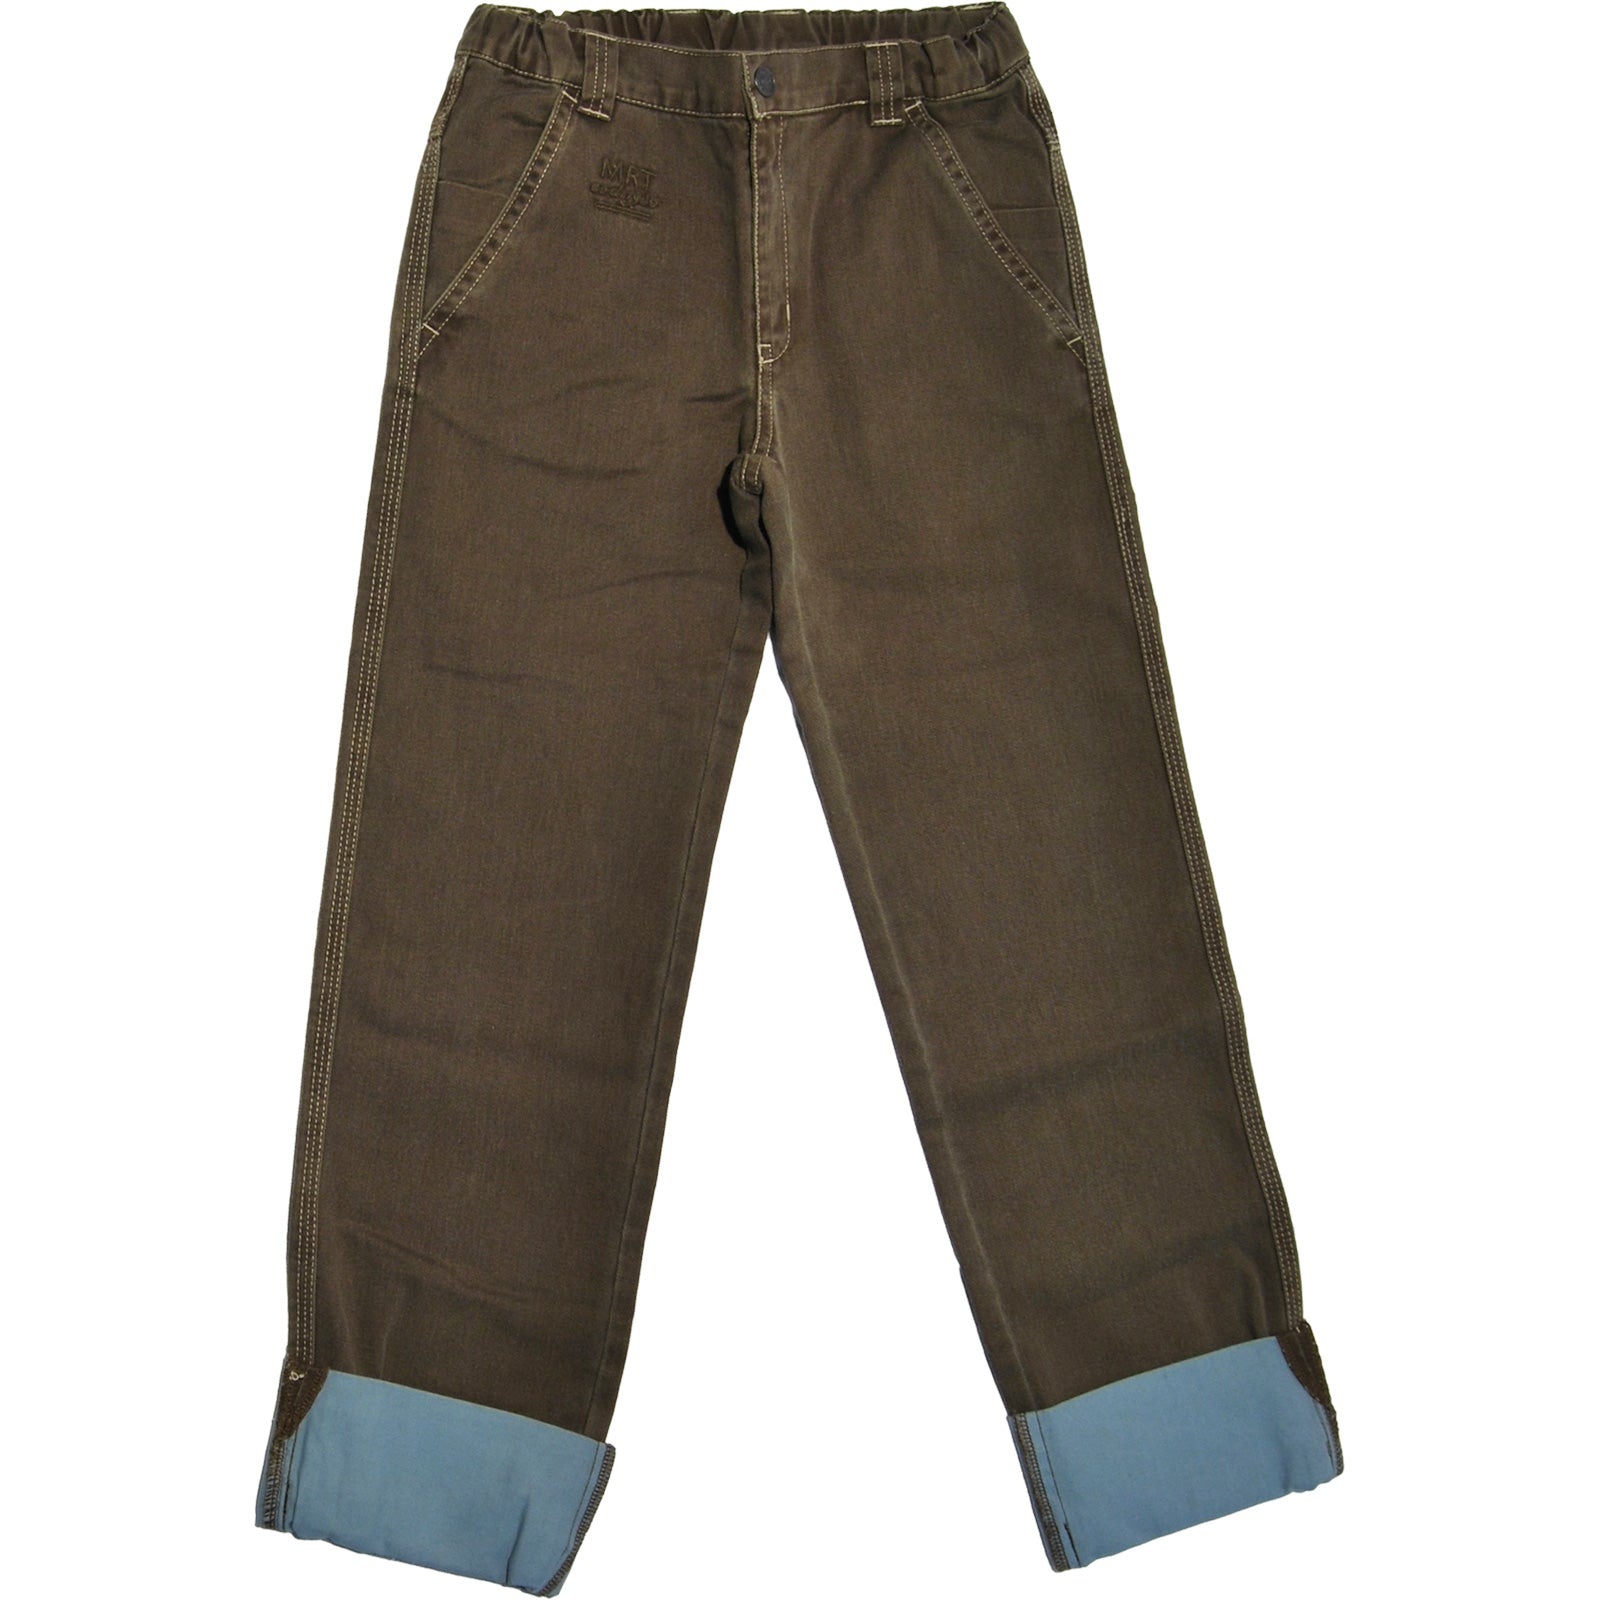 
  Denim trousers from the children's clothing line Mirtillo, 5 pockets , adjustable size
  waist...